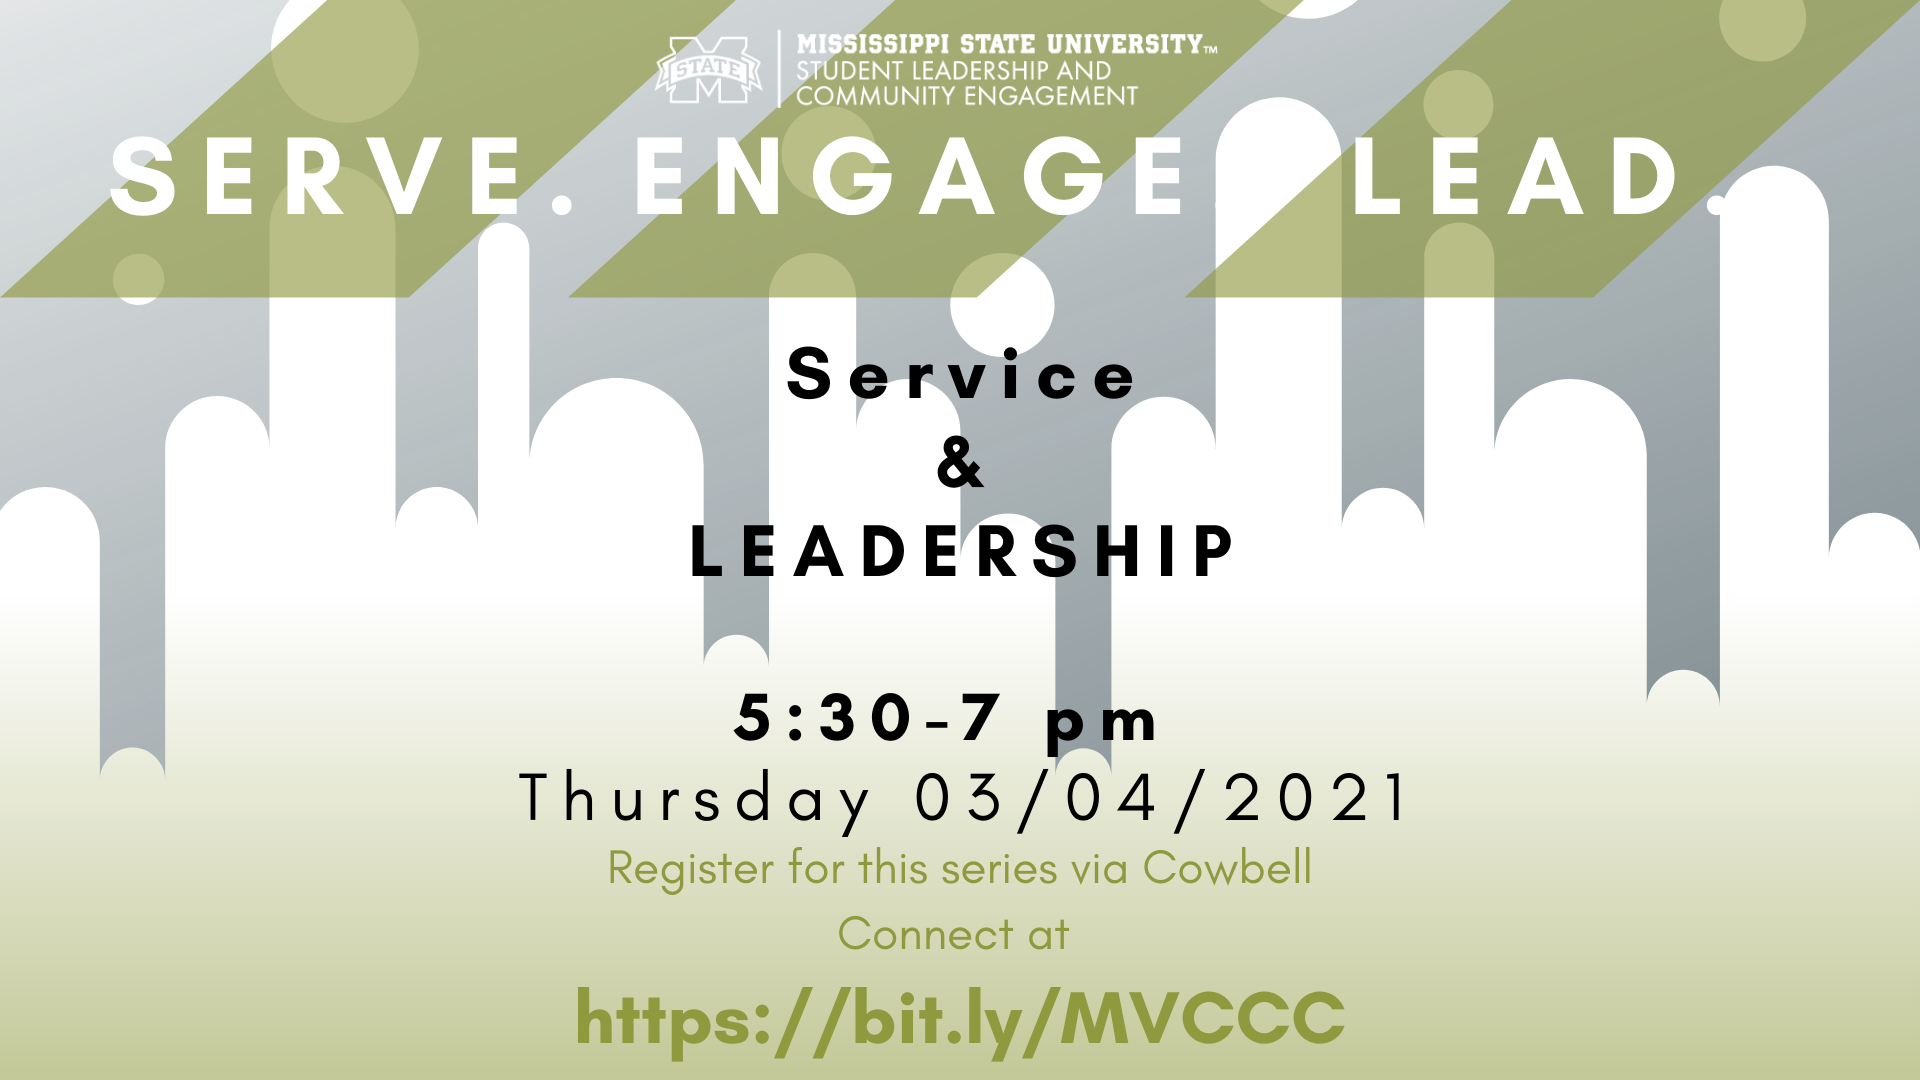 Service and Leadership event graphic with green, white and gray background